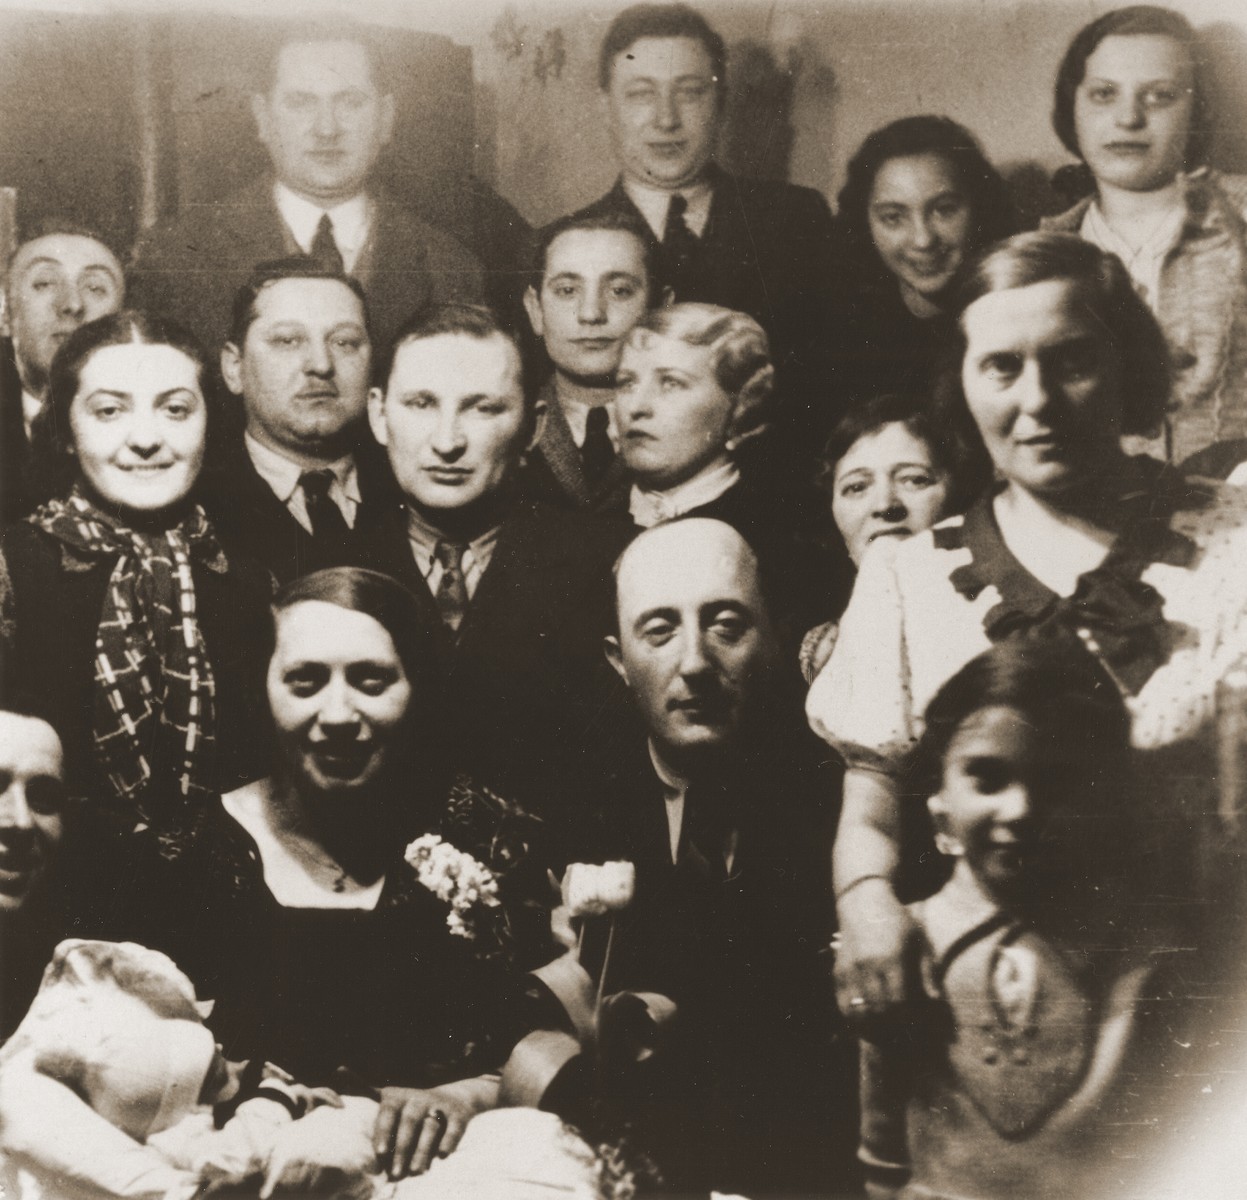 Group portrait of members of the extended Broda family at a gathering to celebrate the birth of the son of Aron and Sheindel Broda in Katowice.

Among those pictured are Aron and Sheindel Broda (front row, center), Tola and Salusia Goldblum (right) and Nacha Broda.